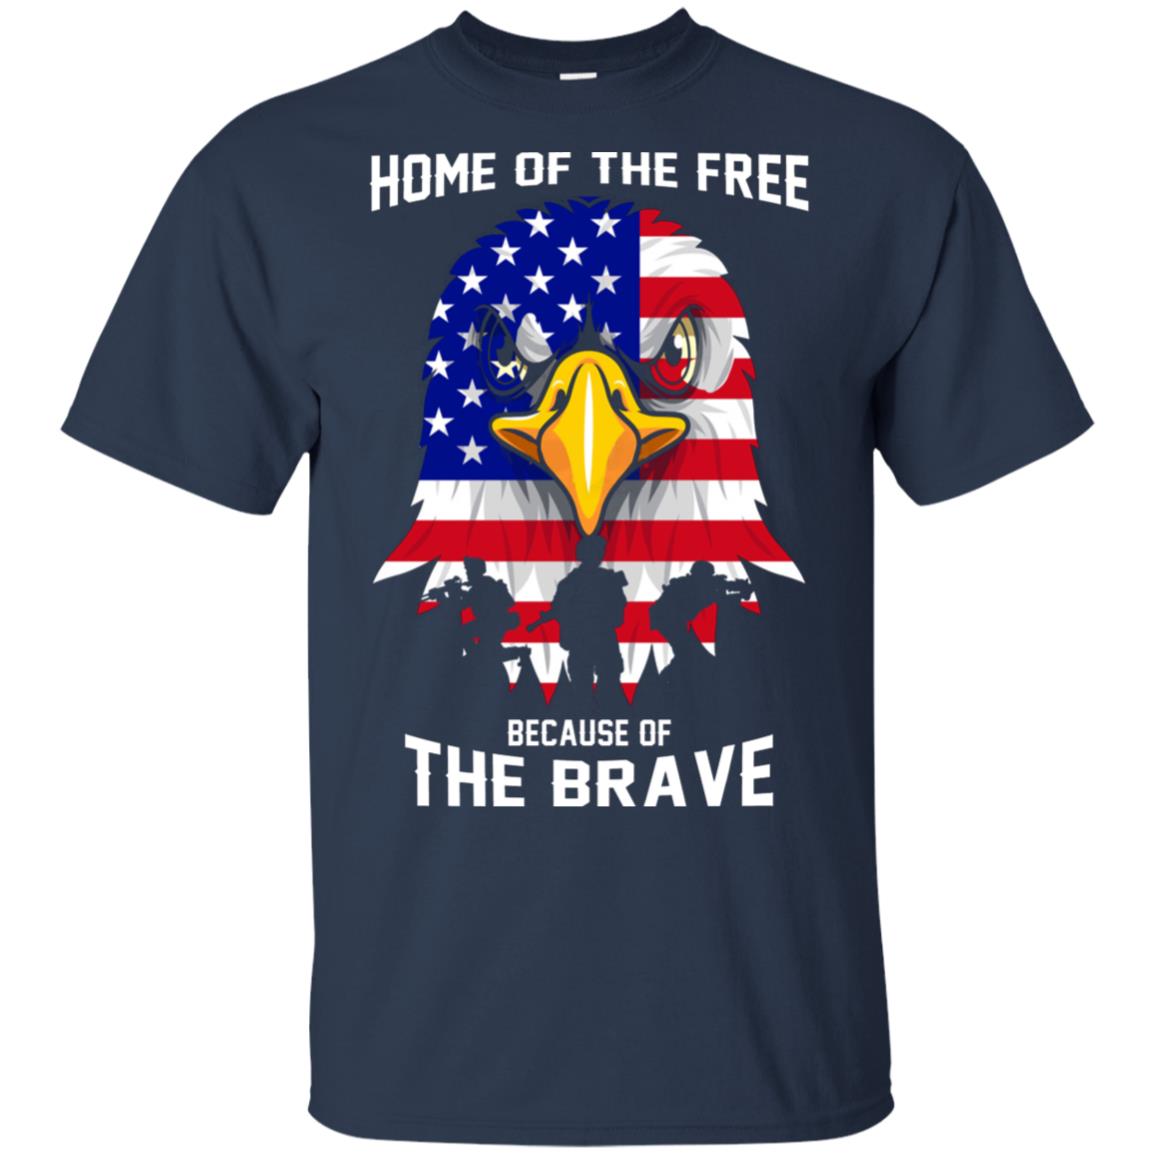 land of the free because of the brave htv shirts